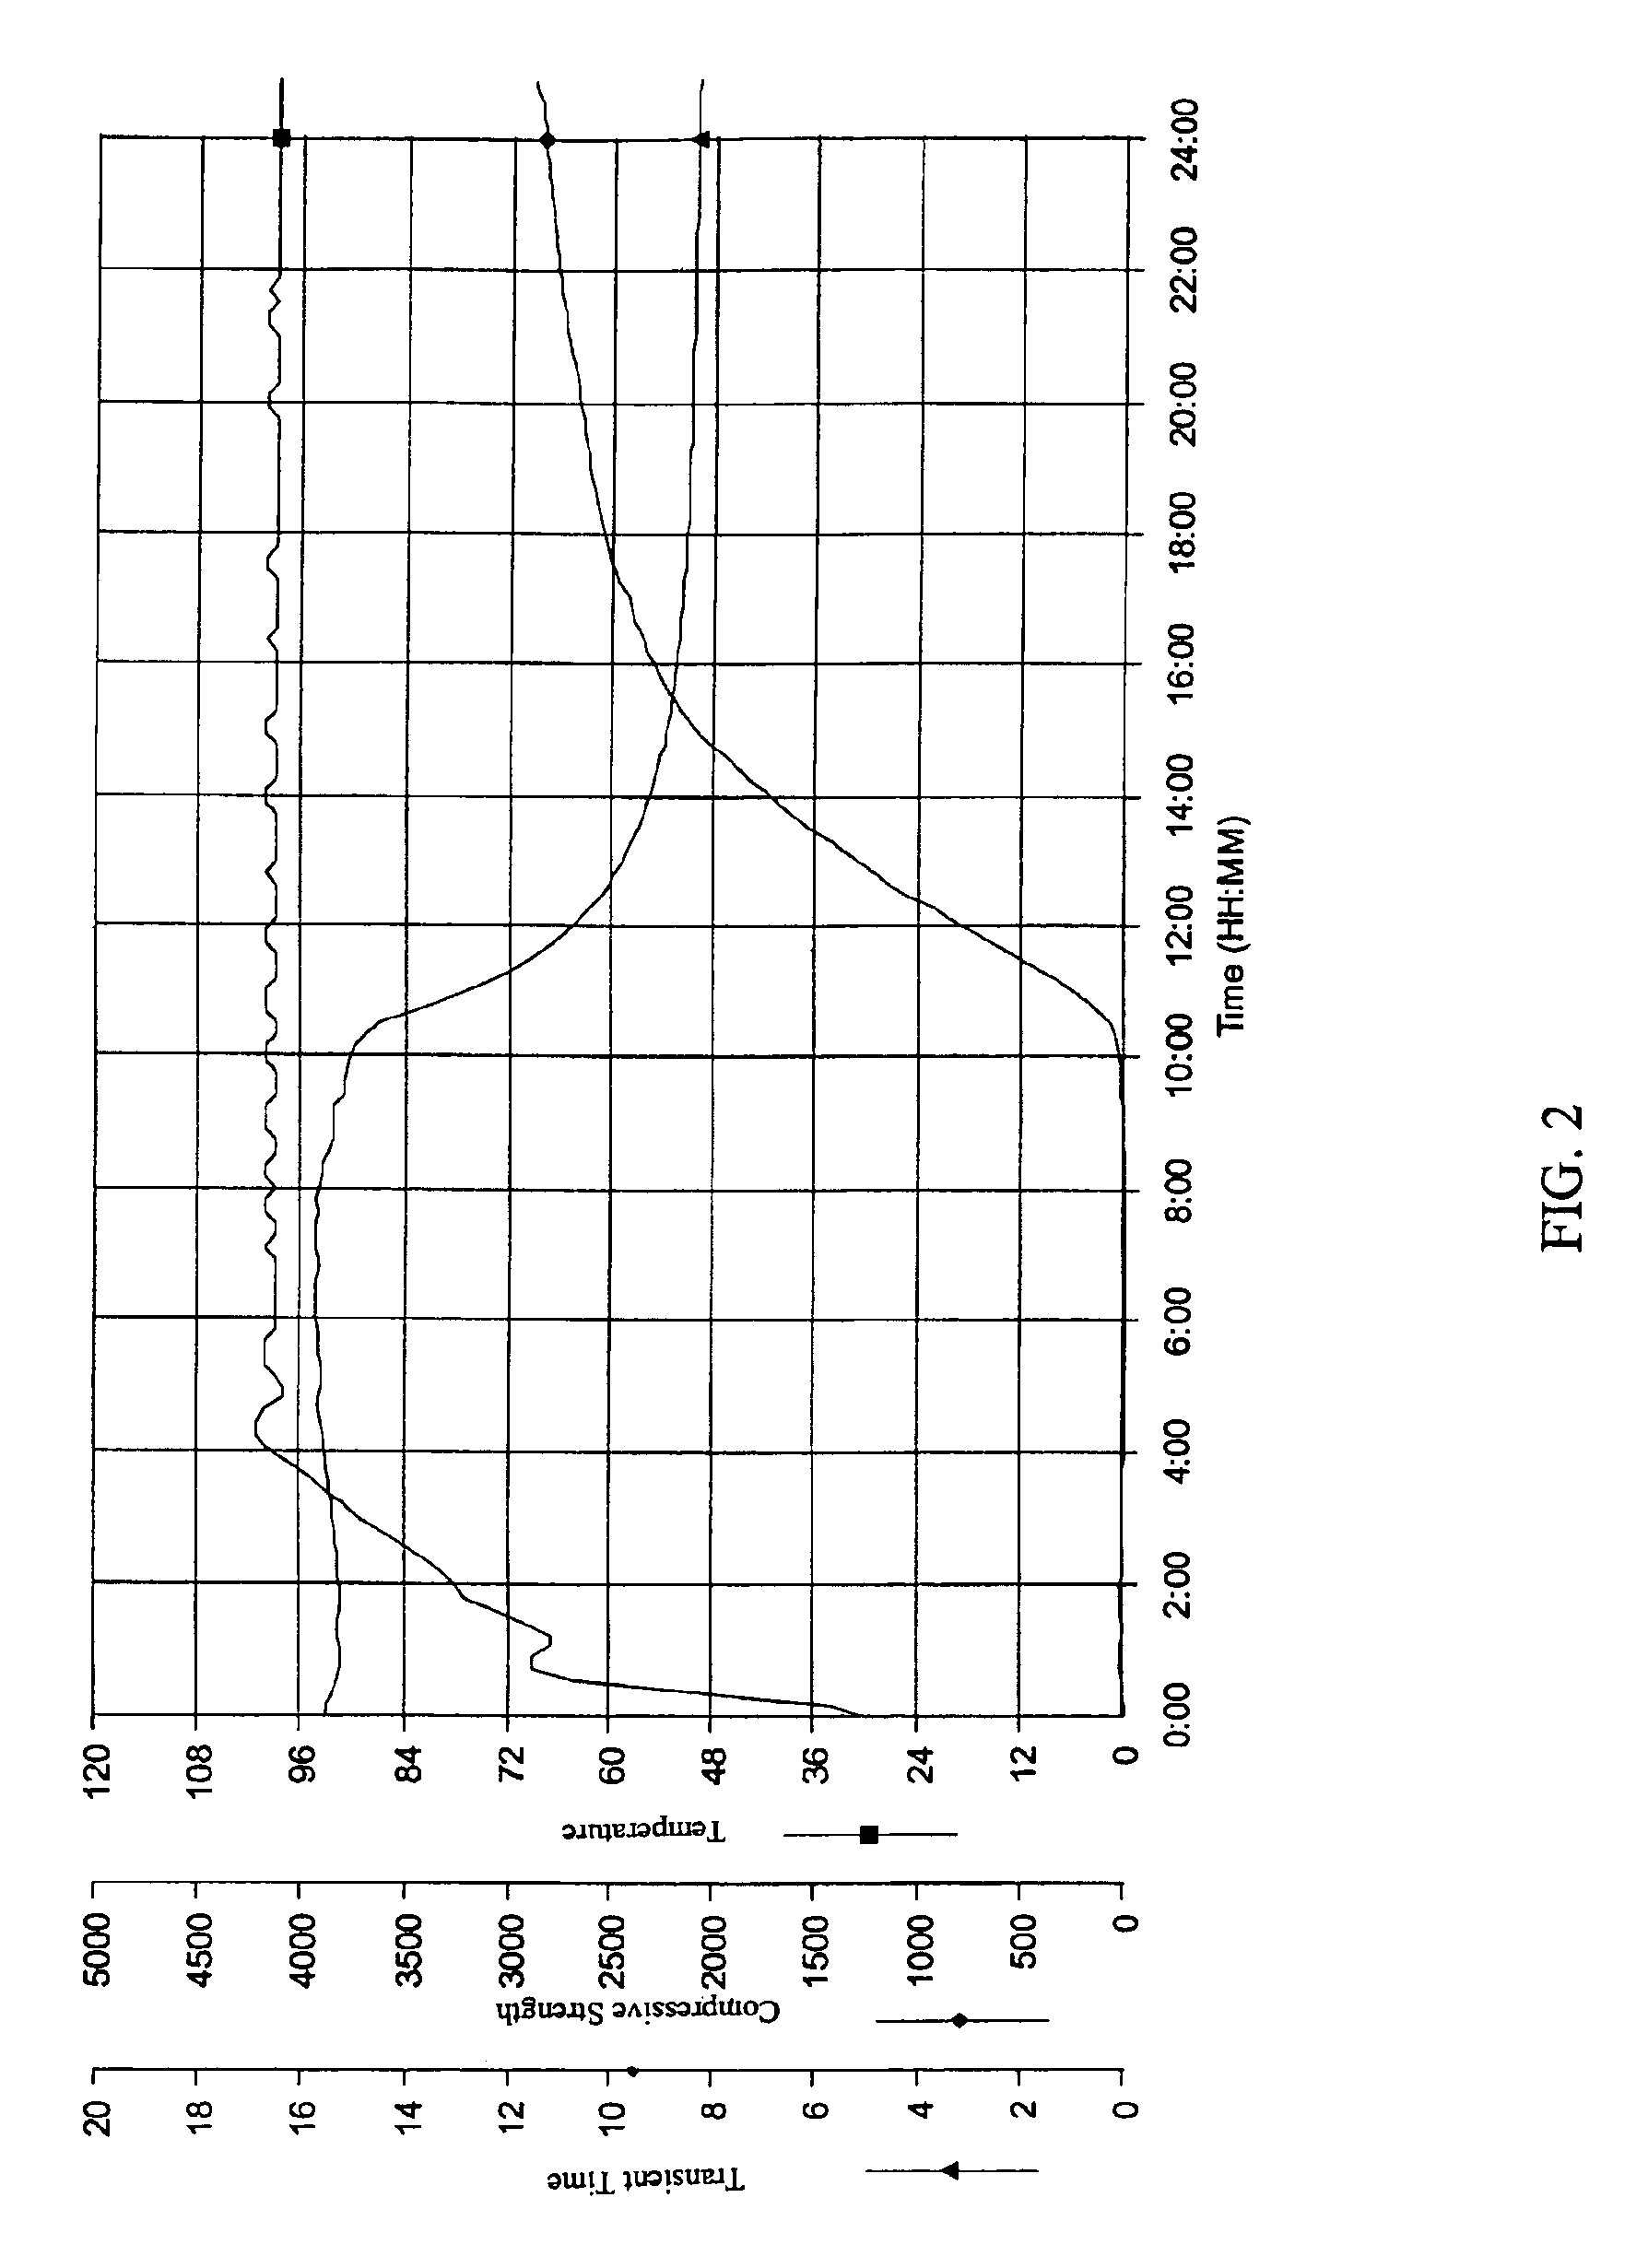 Storable cementitious slurries containing boric acid and method of using the same